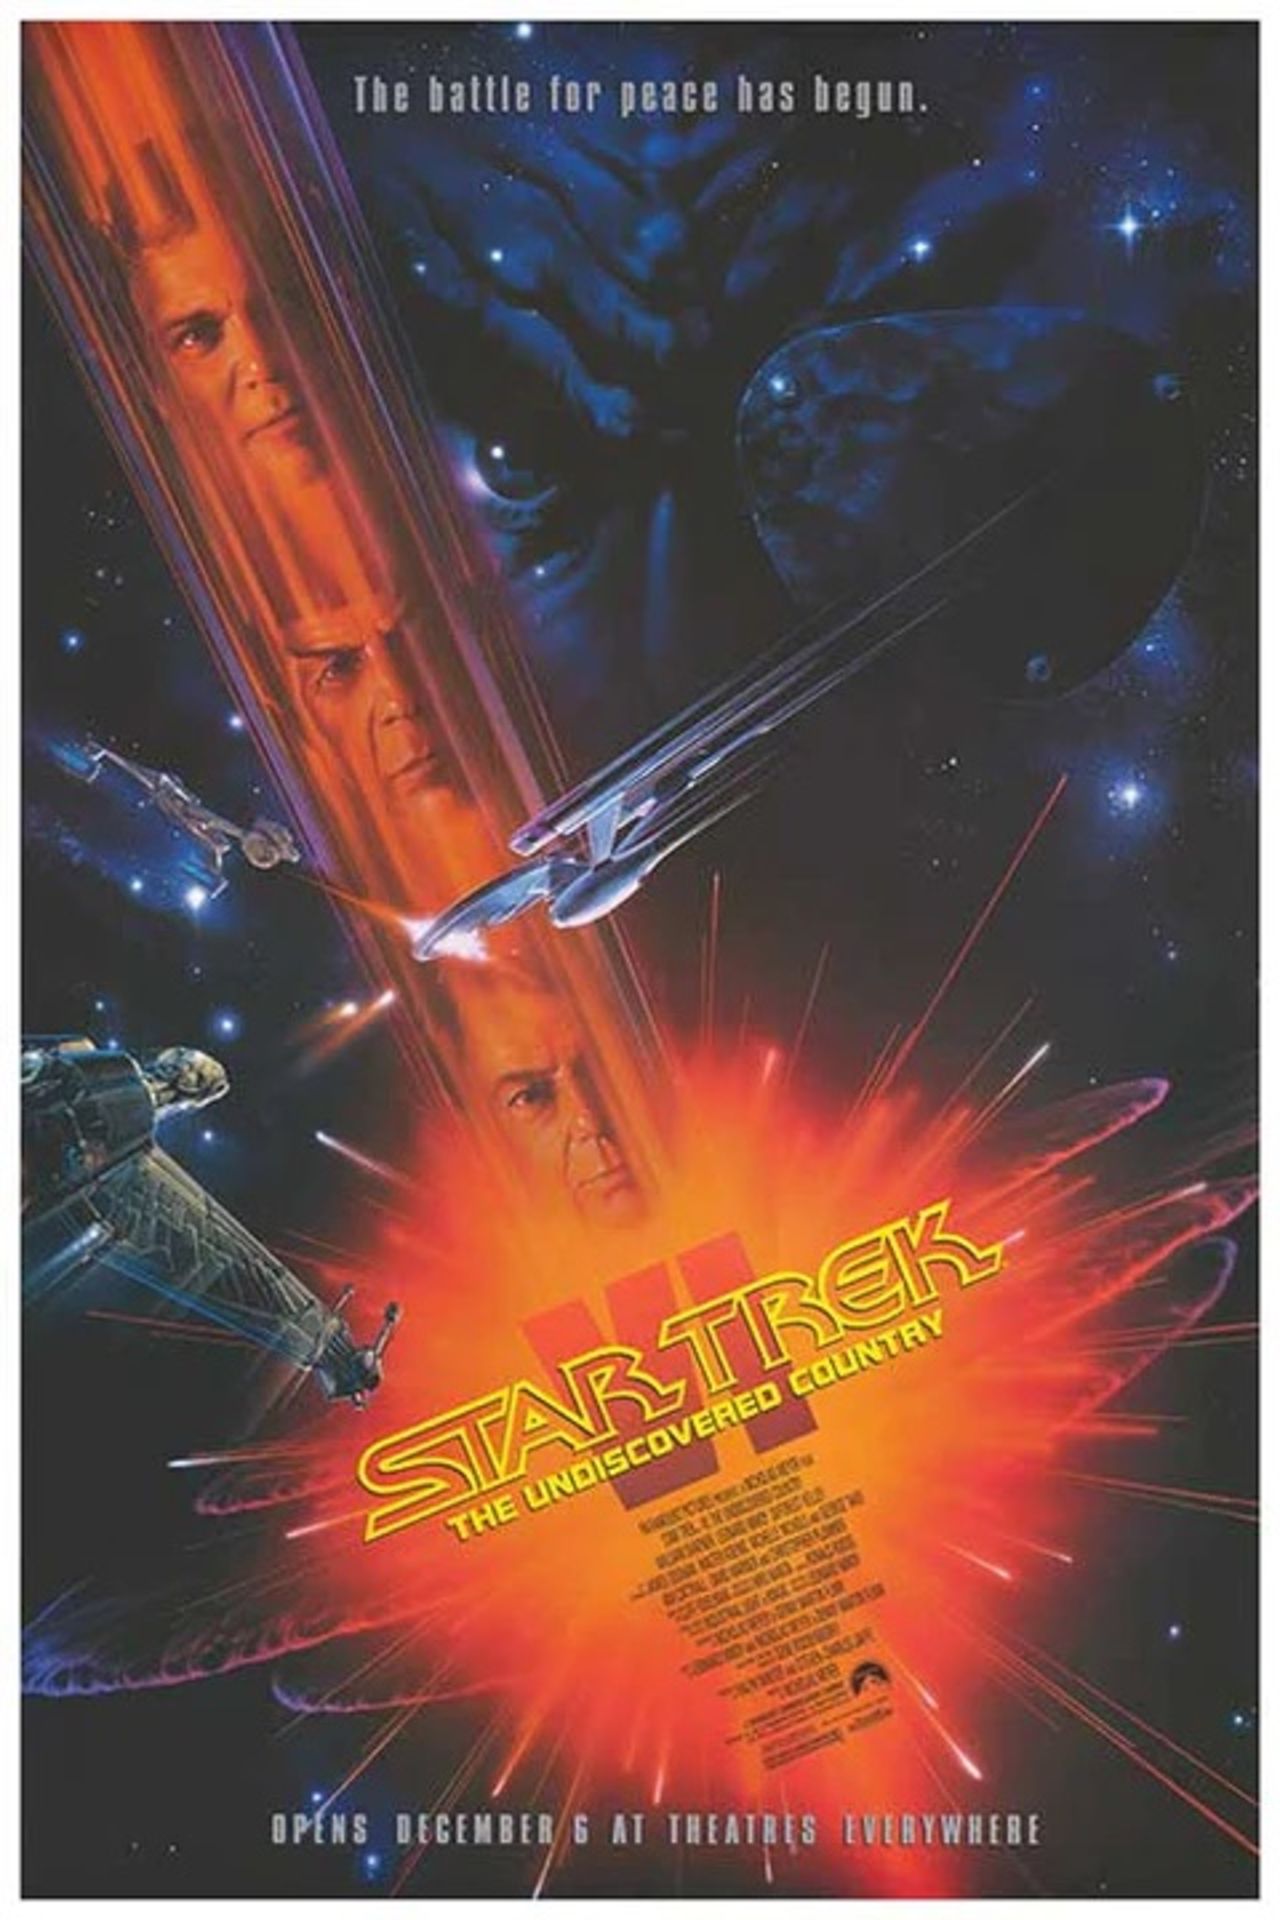 Star Trek VI "The Undiscovered Country, 1991" Movie Poster